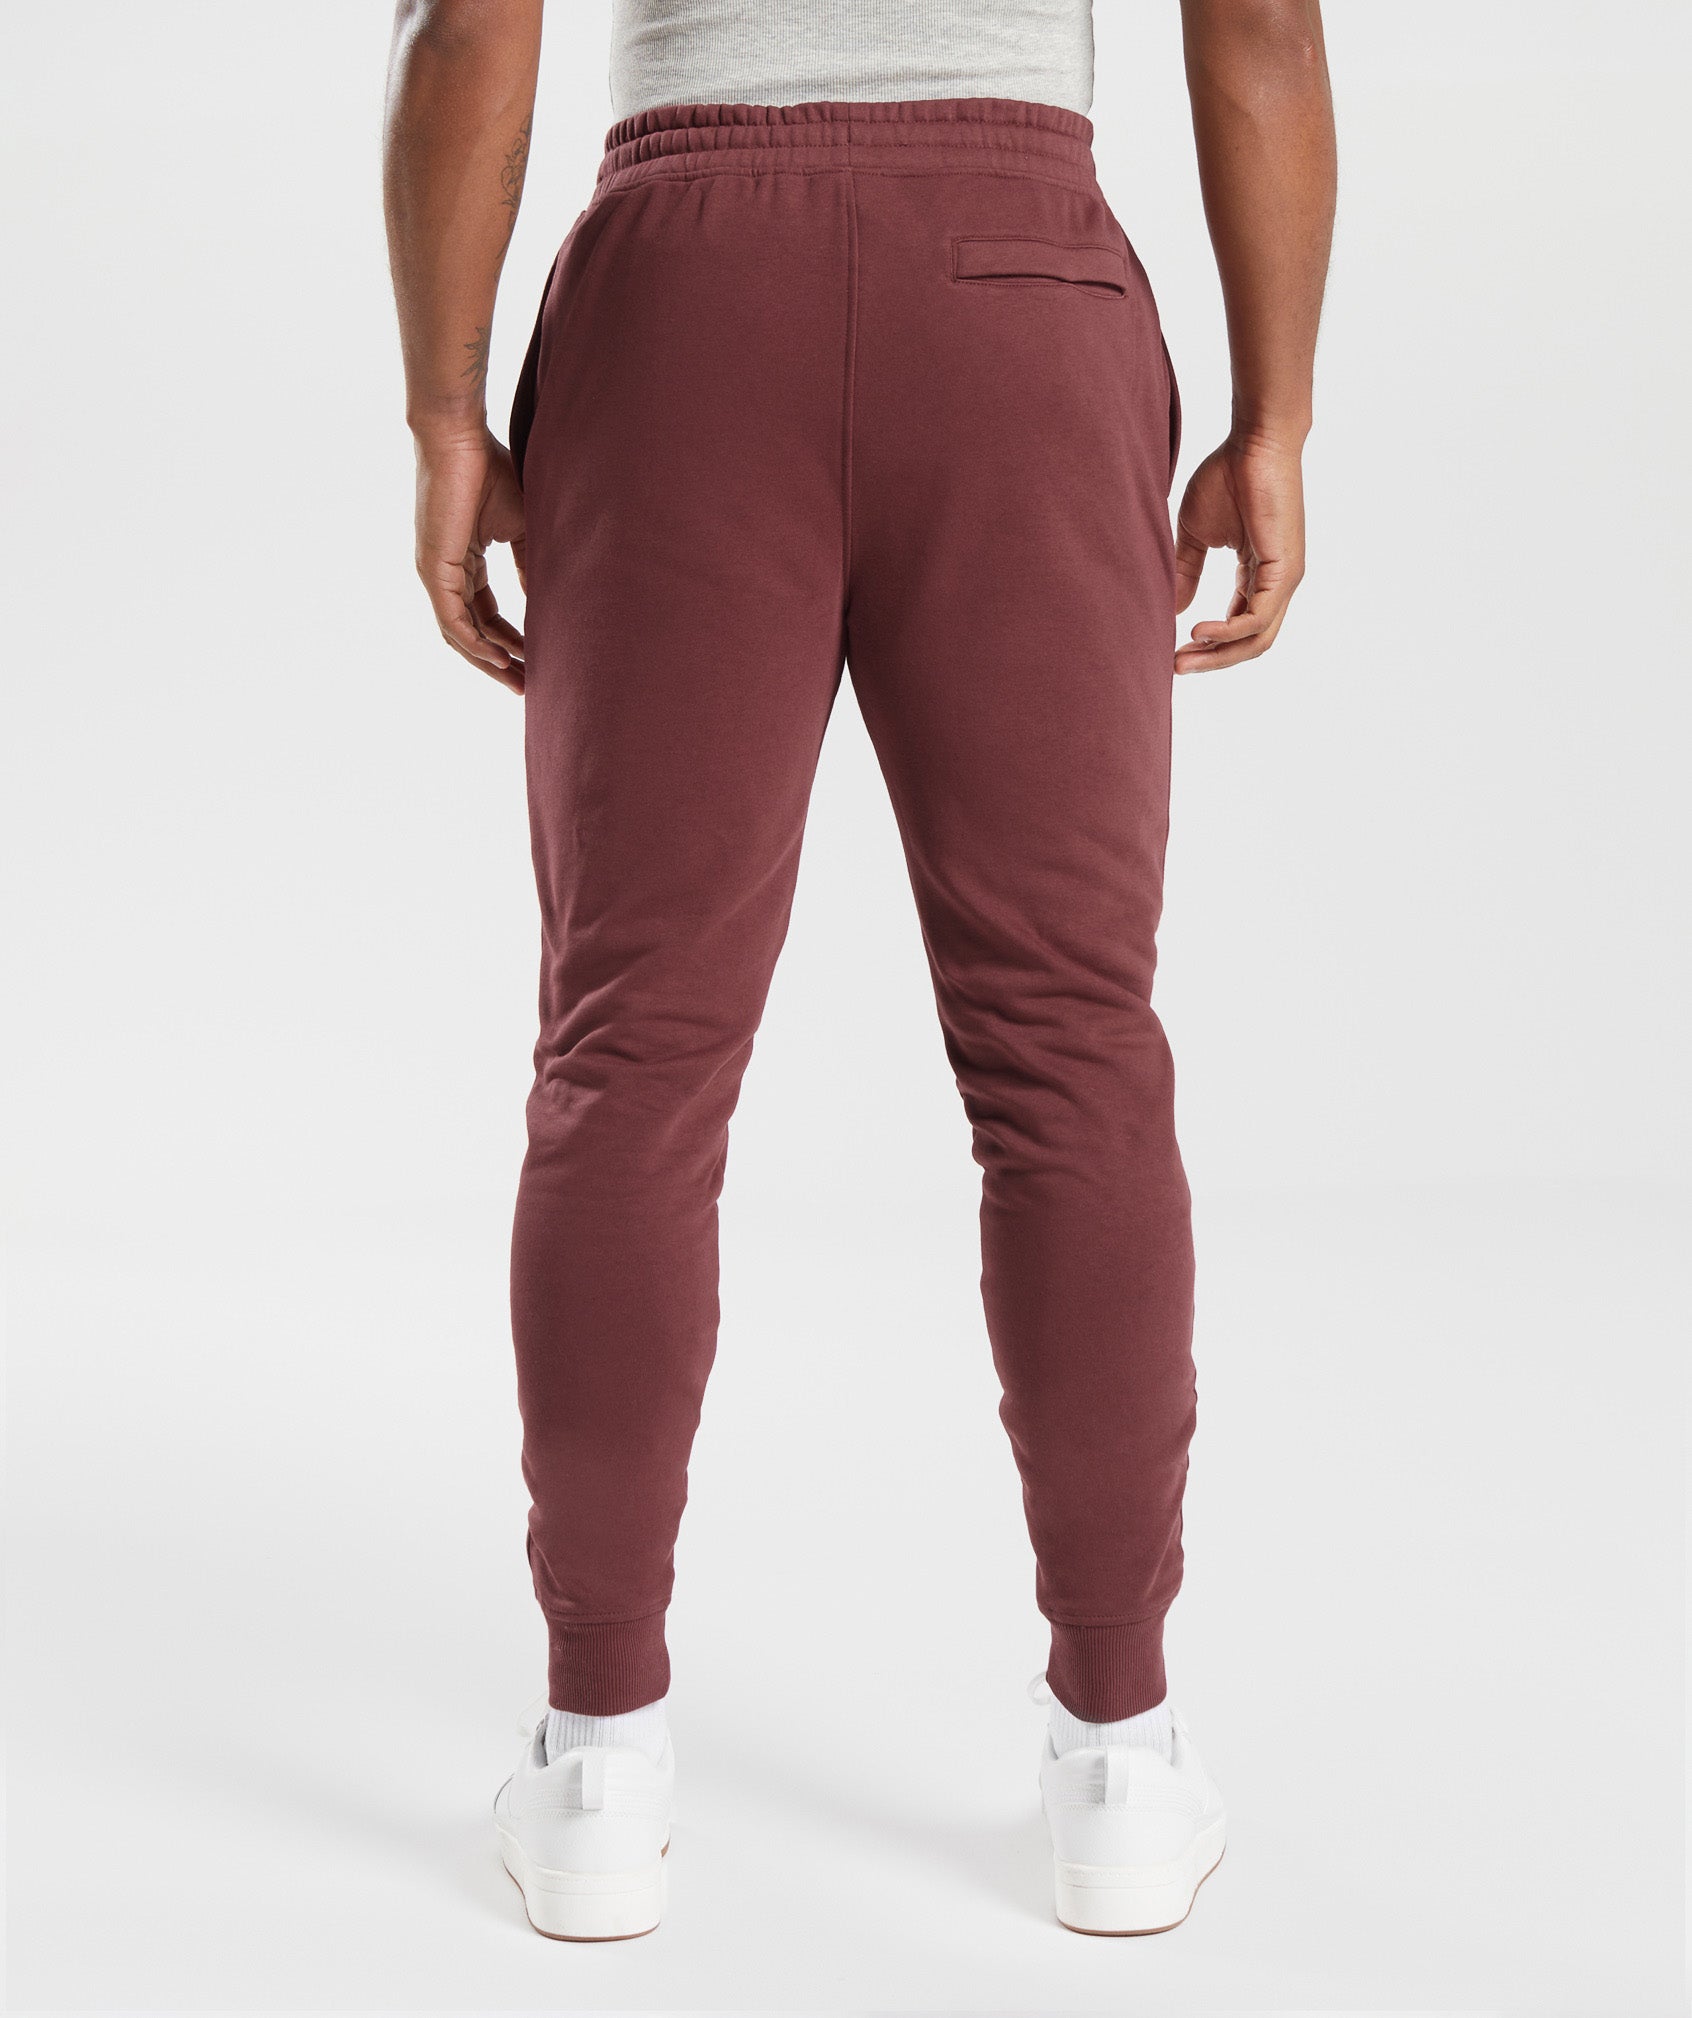 Crest Joggers in Washed Burgundy - view 2